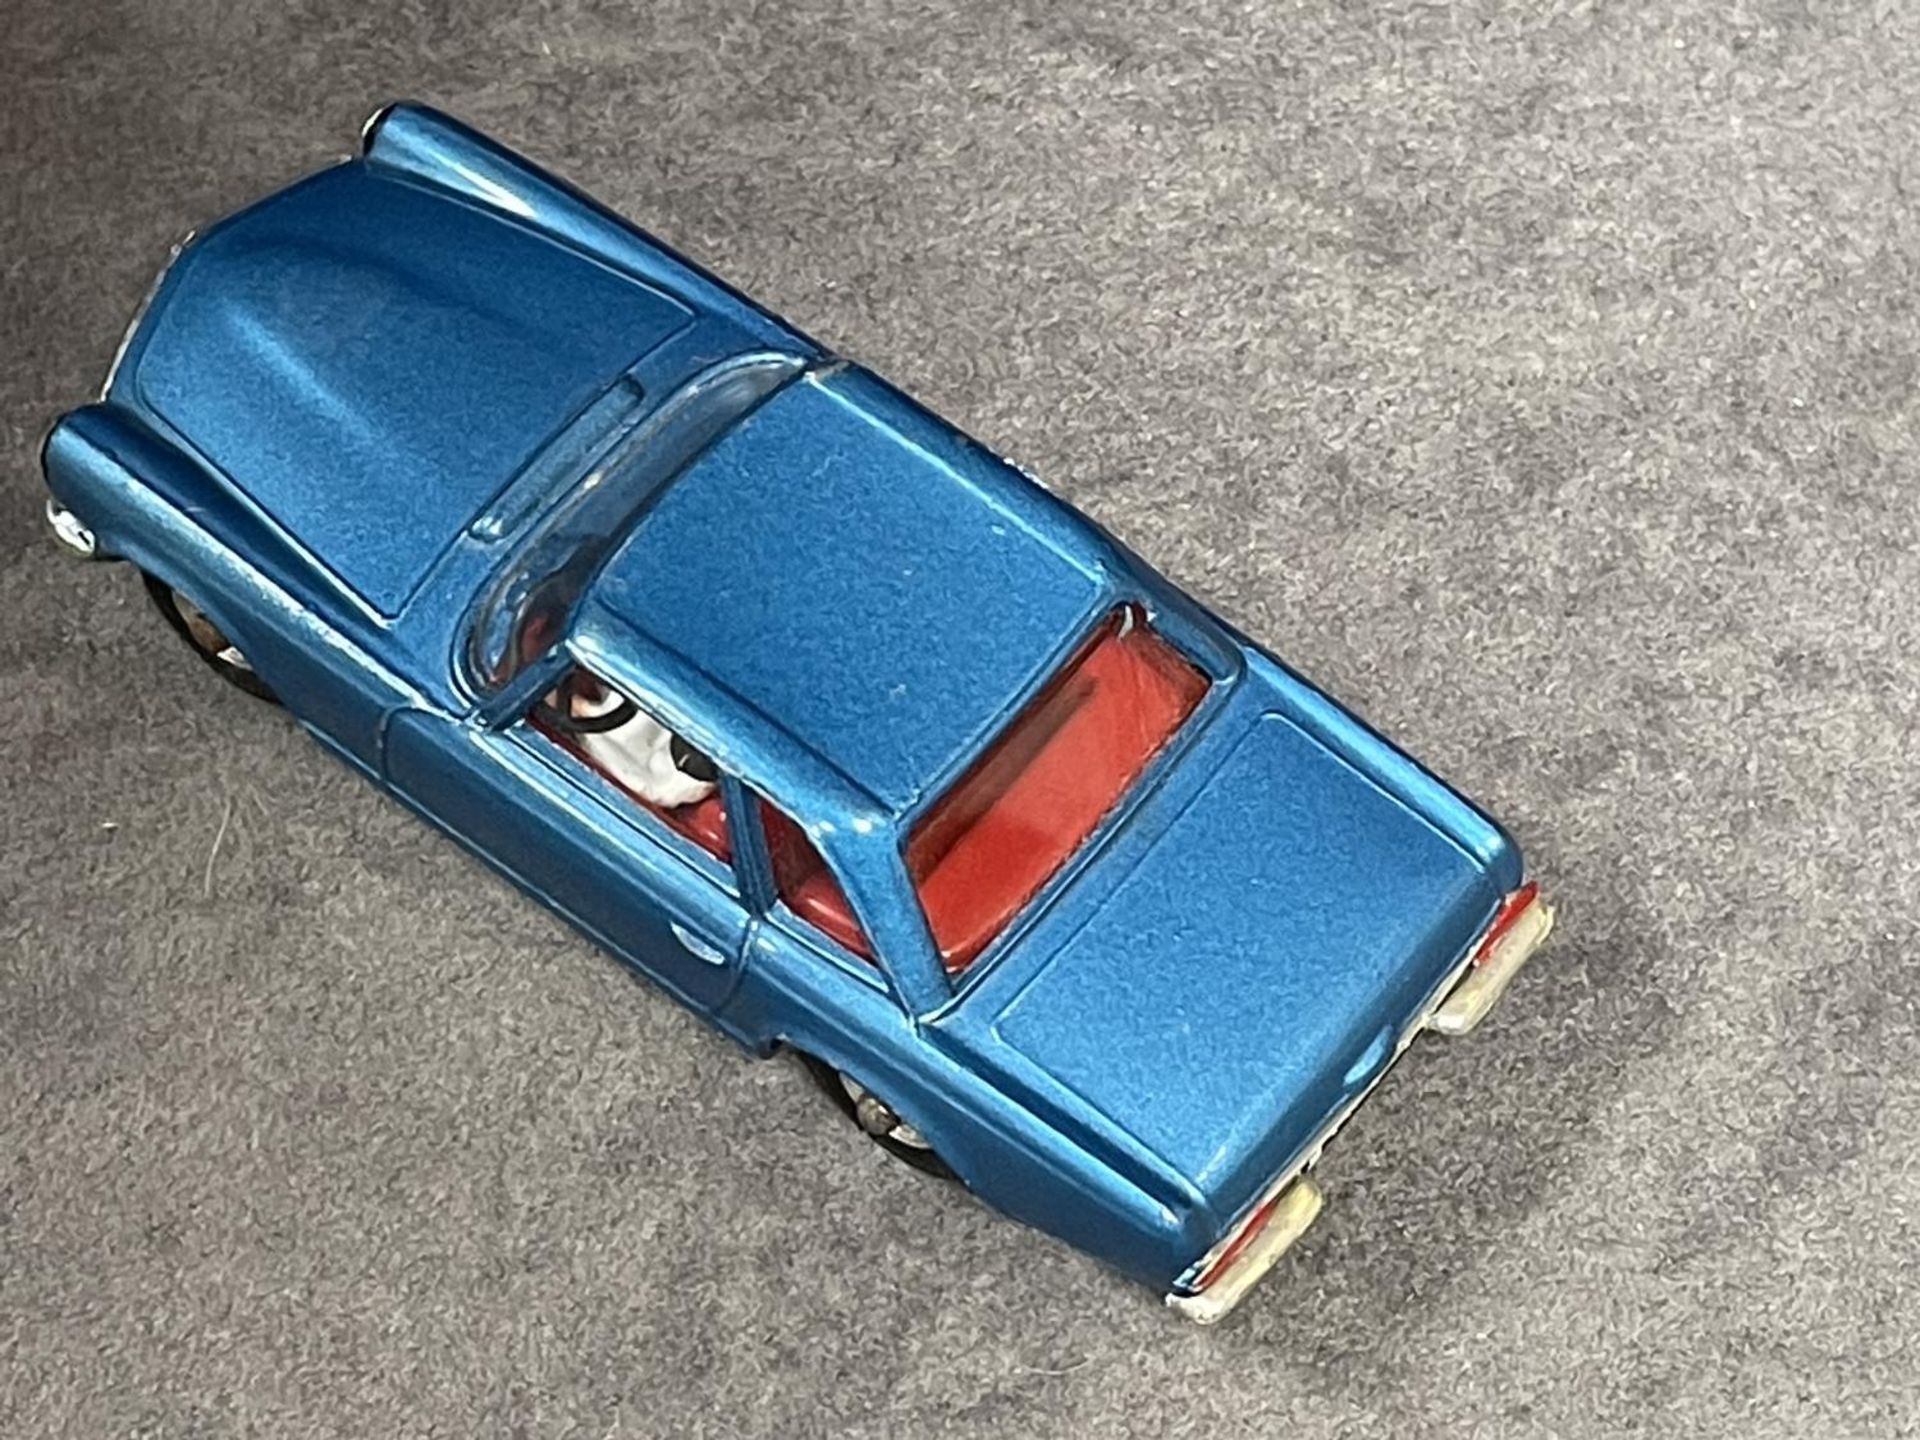 Spot-On #278 Mercedes Benz 230 SL In Metallic Blue With Red Interior Model In Excellent Condition - Image 3 of 5